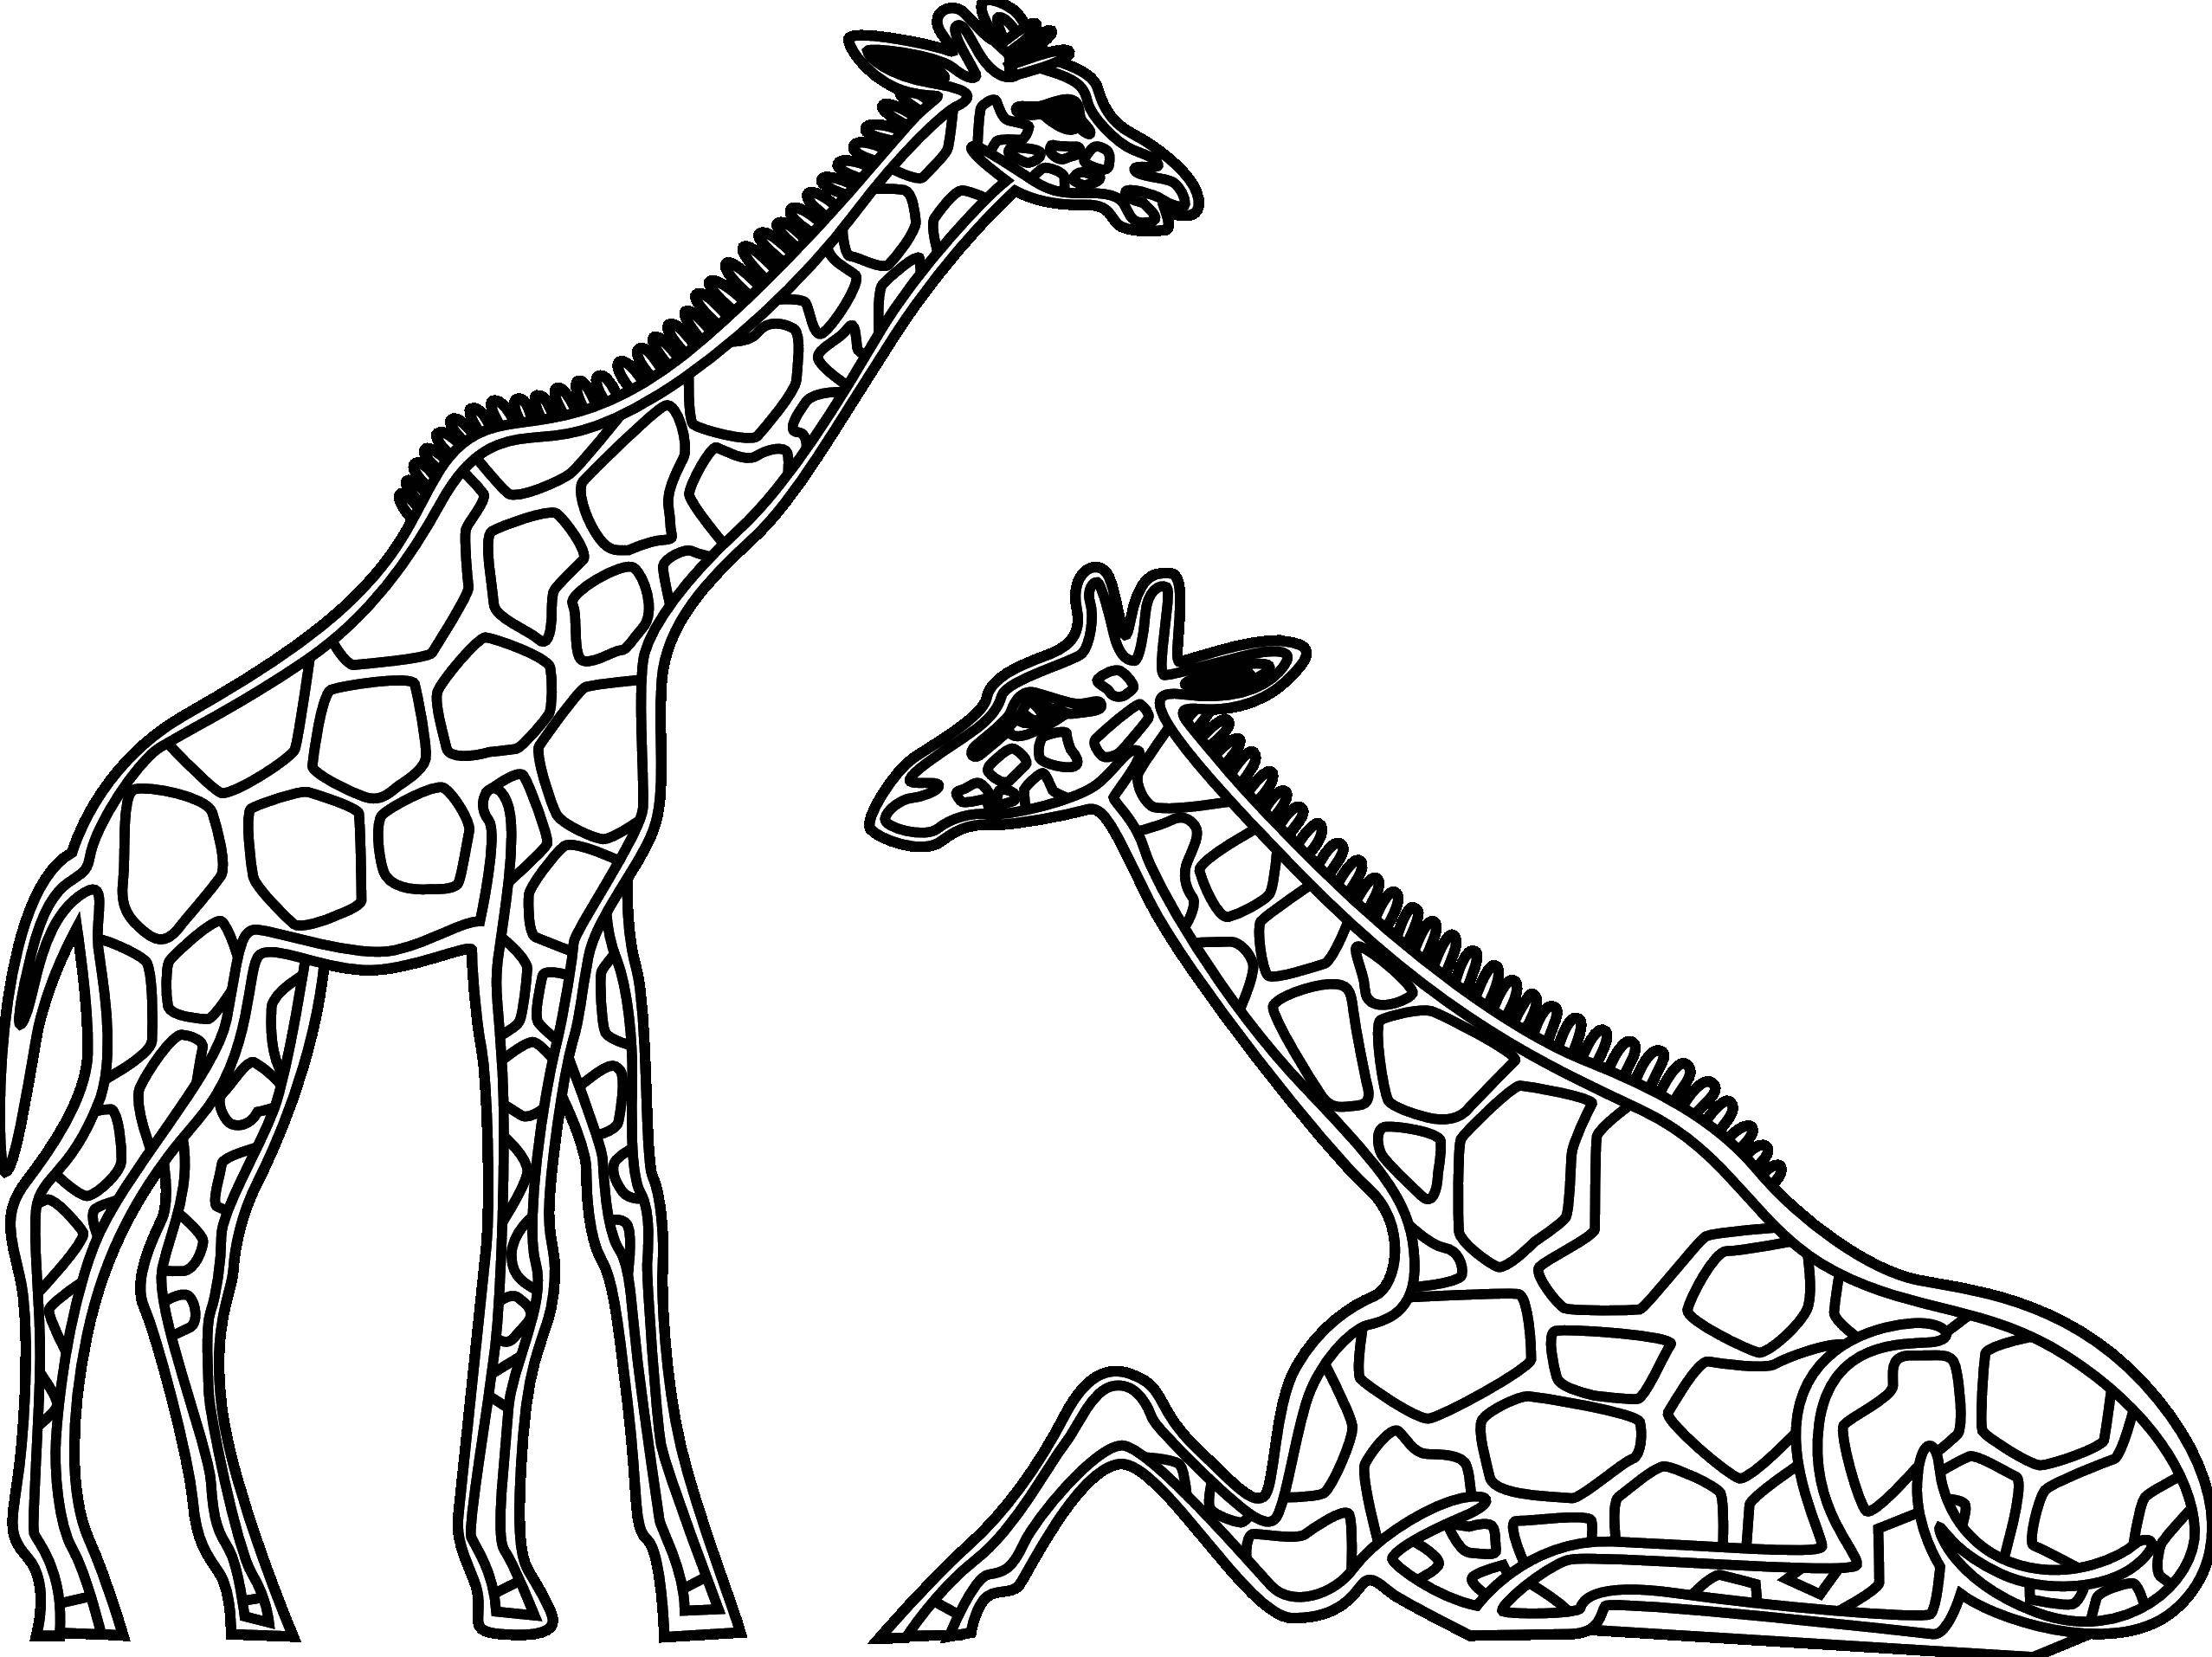 Coloring Giraffes sitting. Category The outline of a giraffe for cutting. Tags:  giraffes.